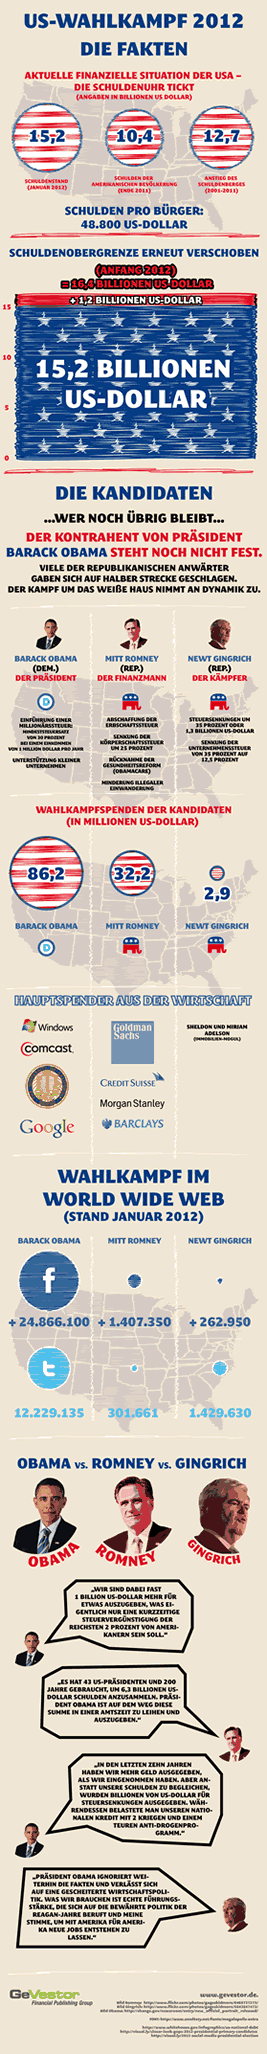 US-Wahlkampf 2012 Infographic